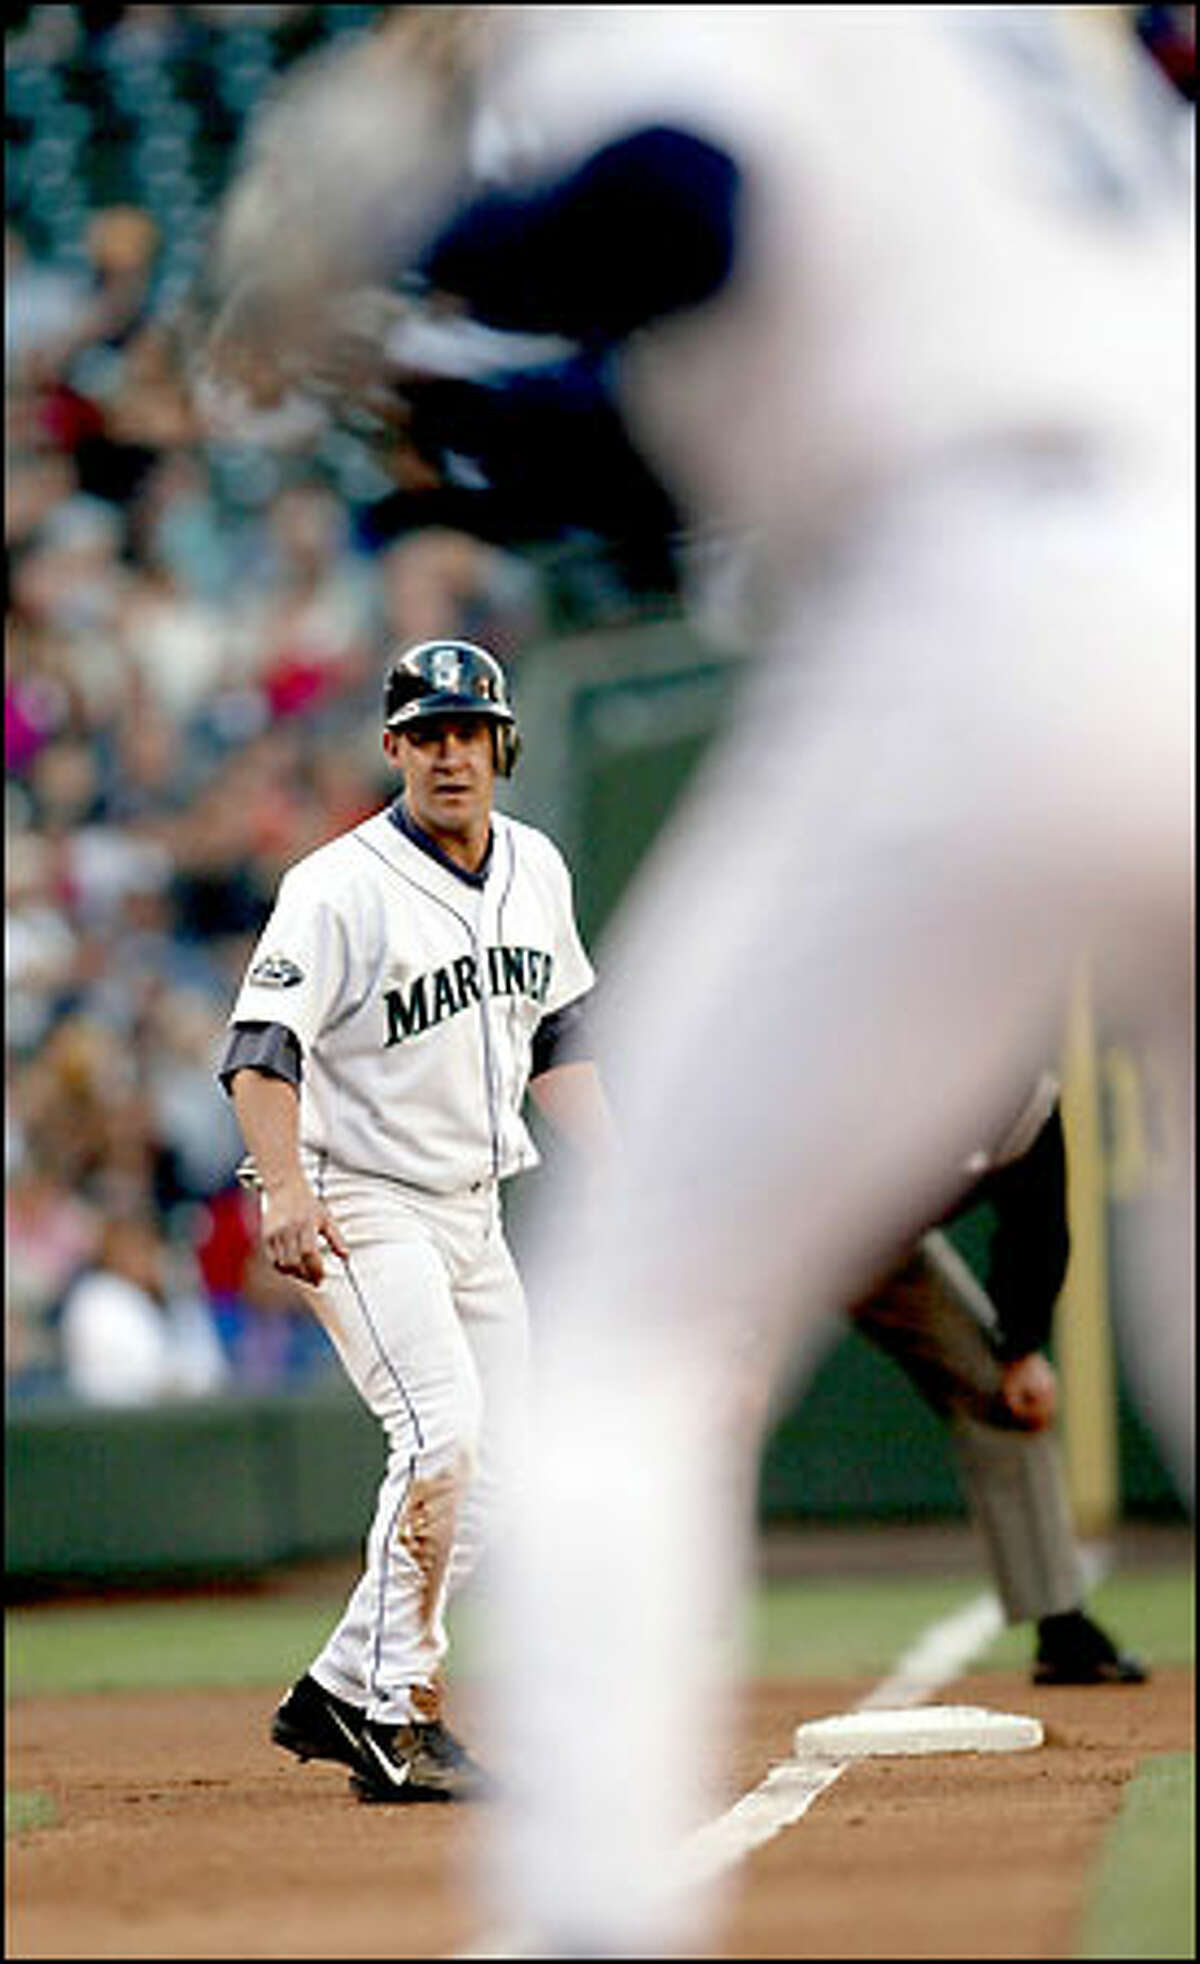 Bret Boone starts home on a hit by John Olerud in the first inning of play against the Kansas City Royals.